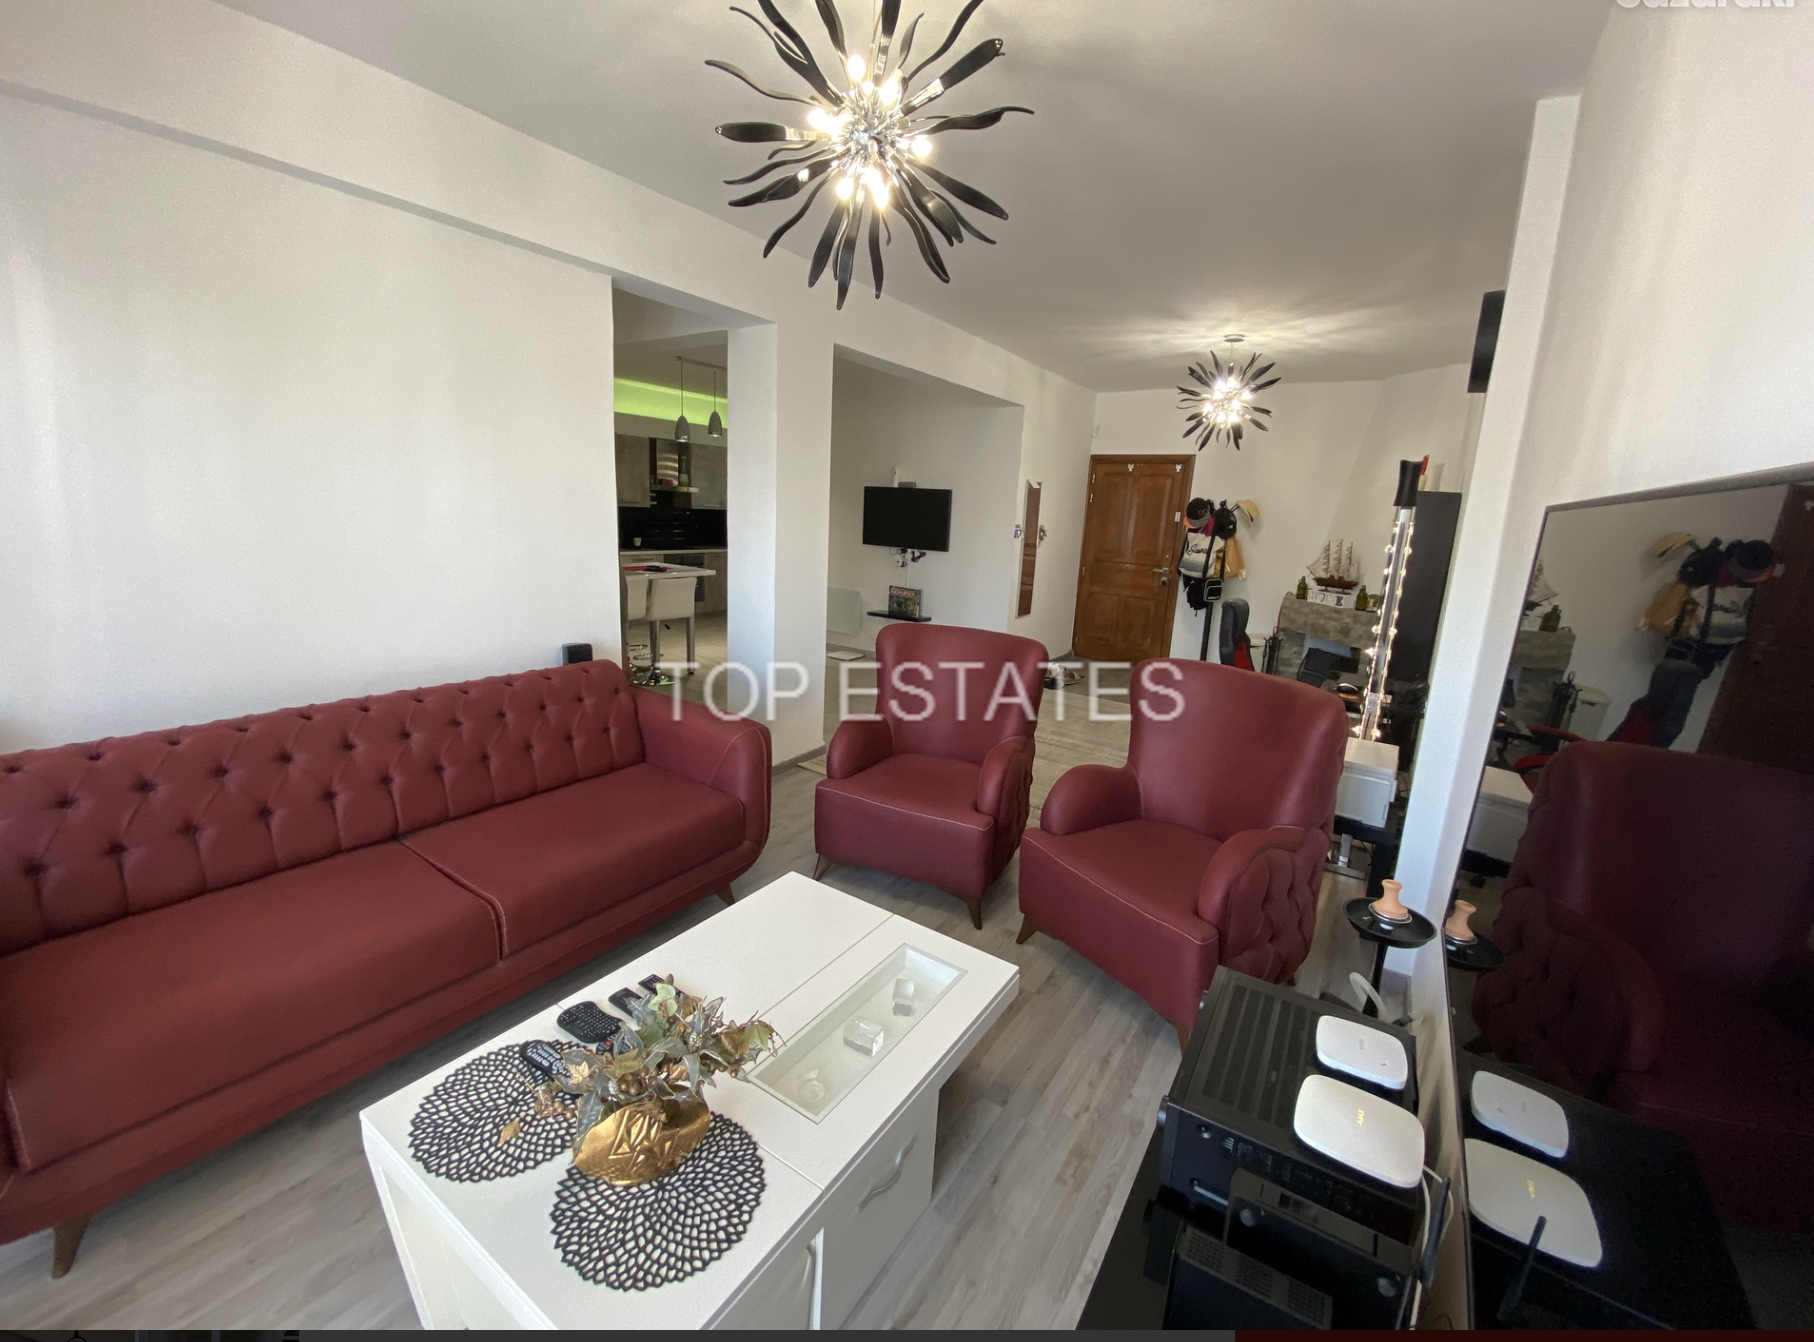 For Sale 3 bedrooms apartment in Larnaca city centre